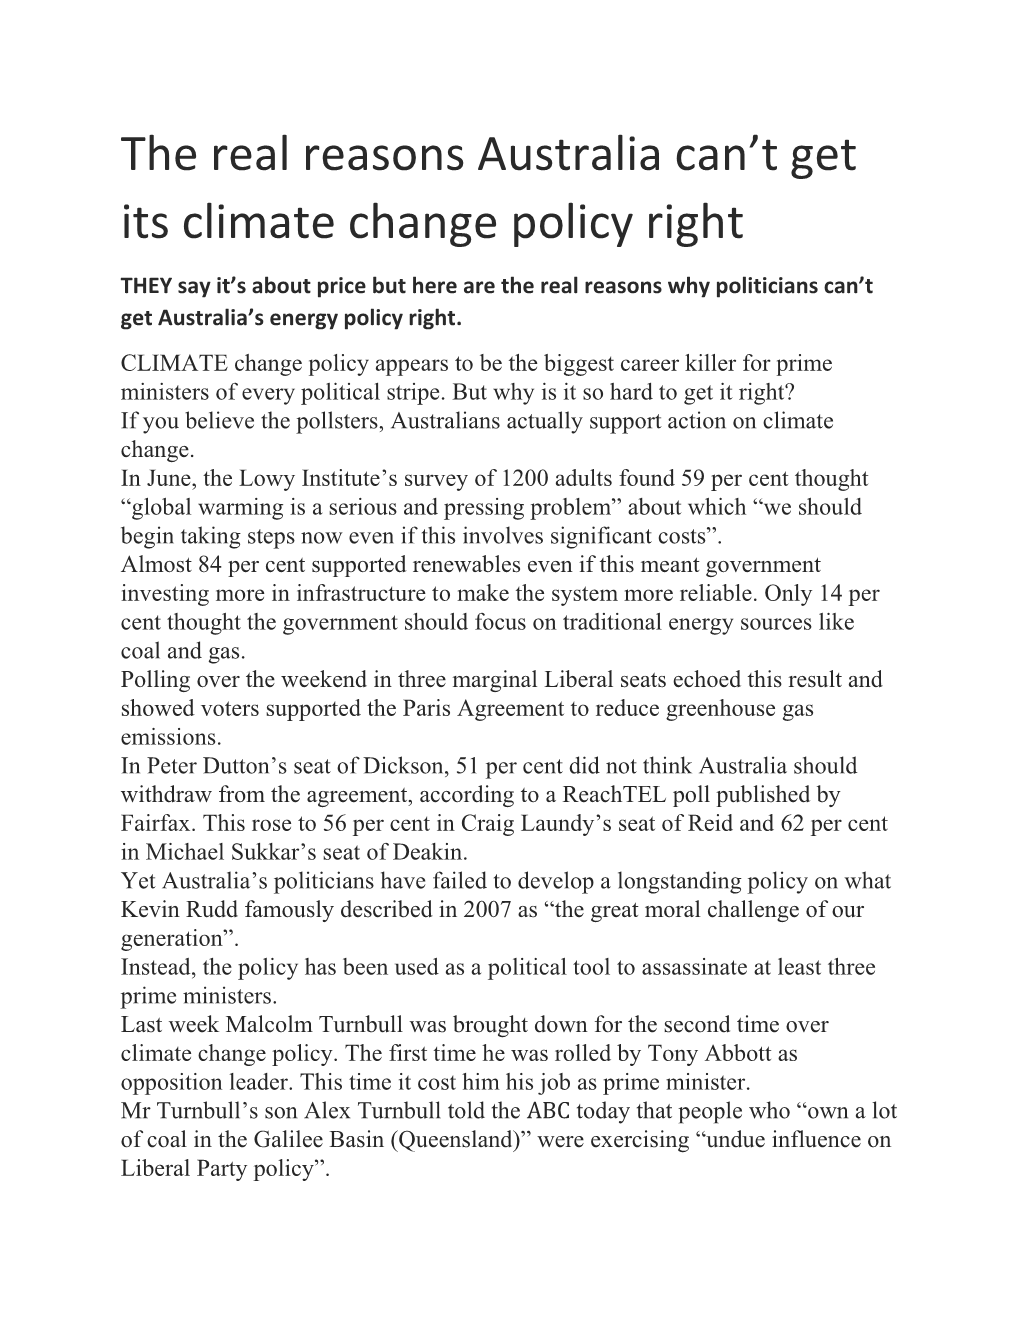 The Real Reasons Australia Can't Get Its Climate Change Policy Right